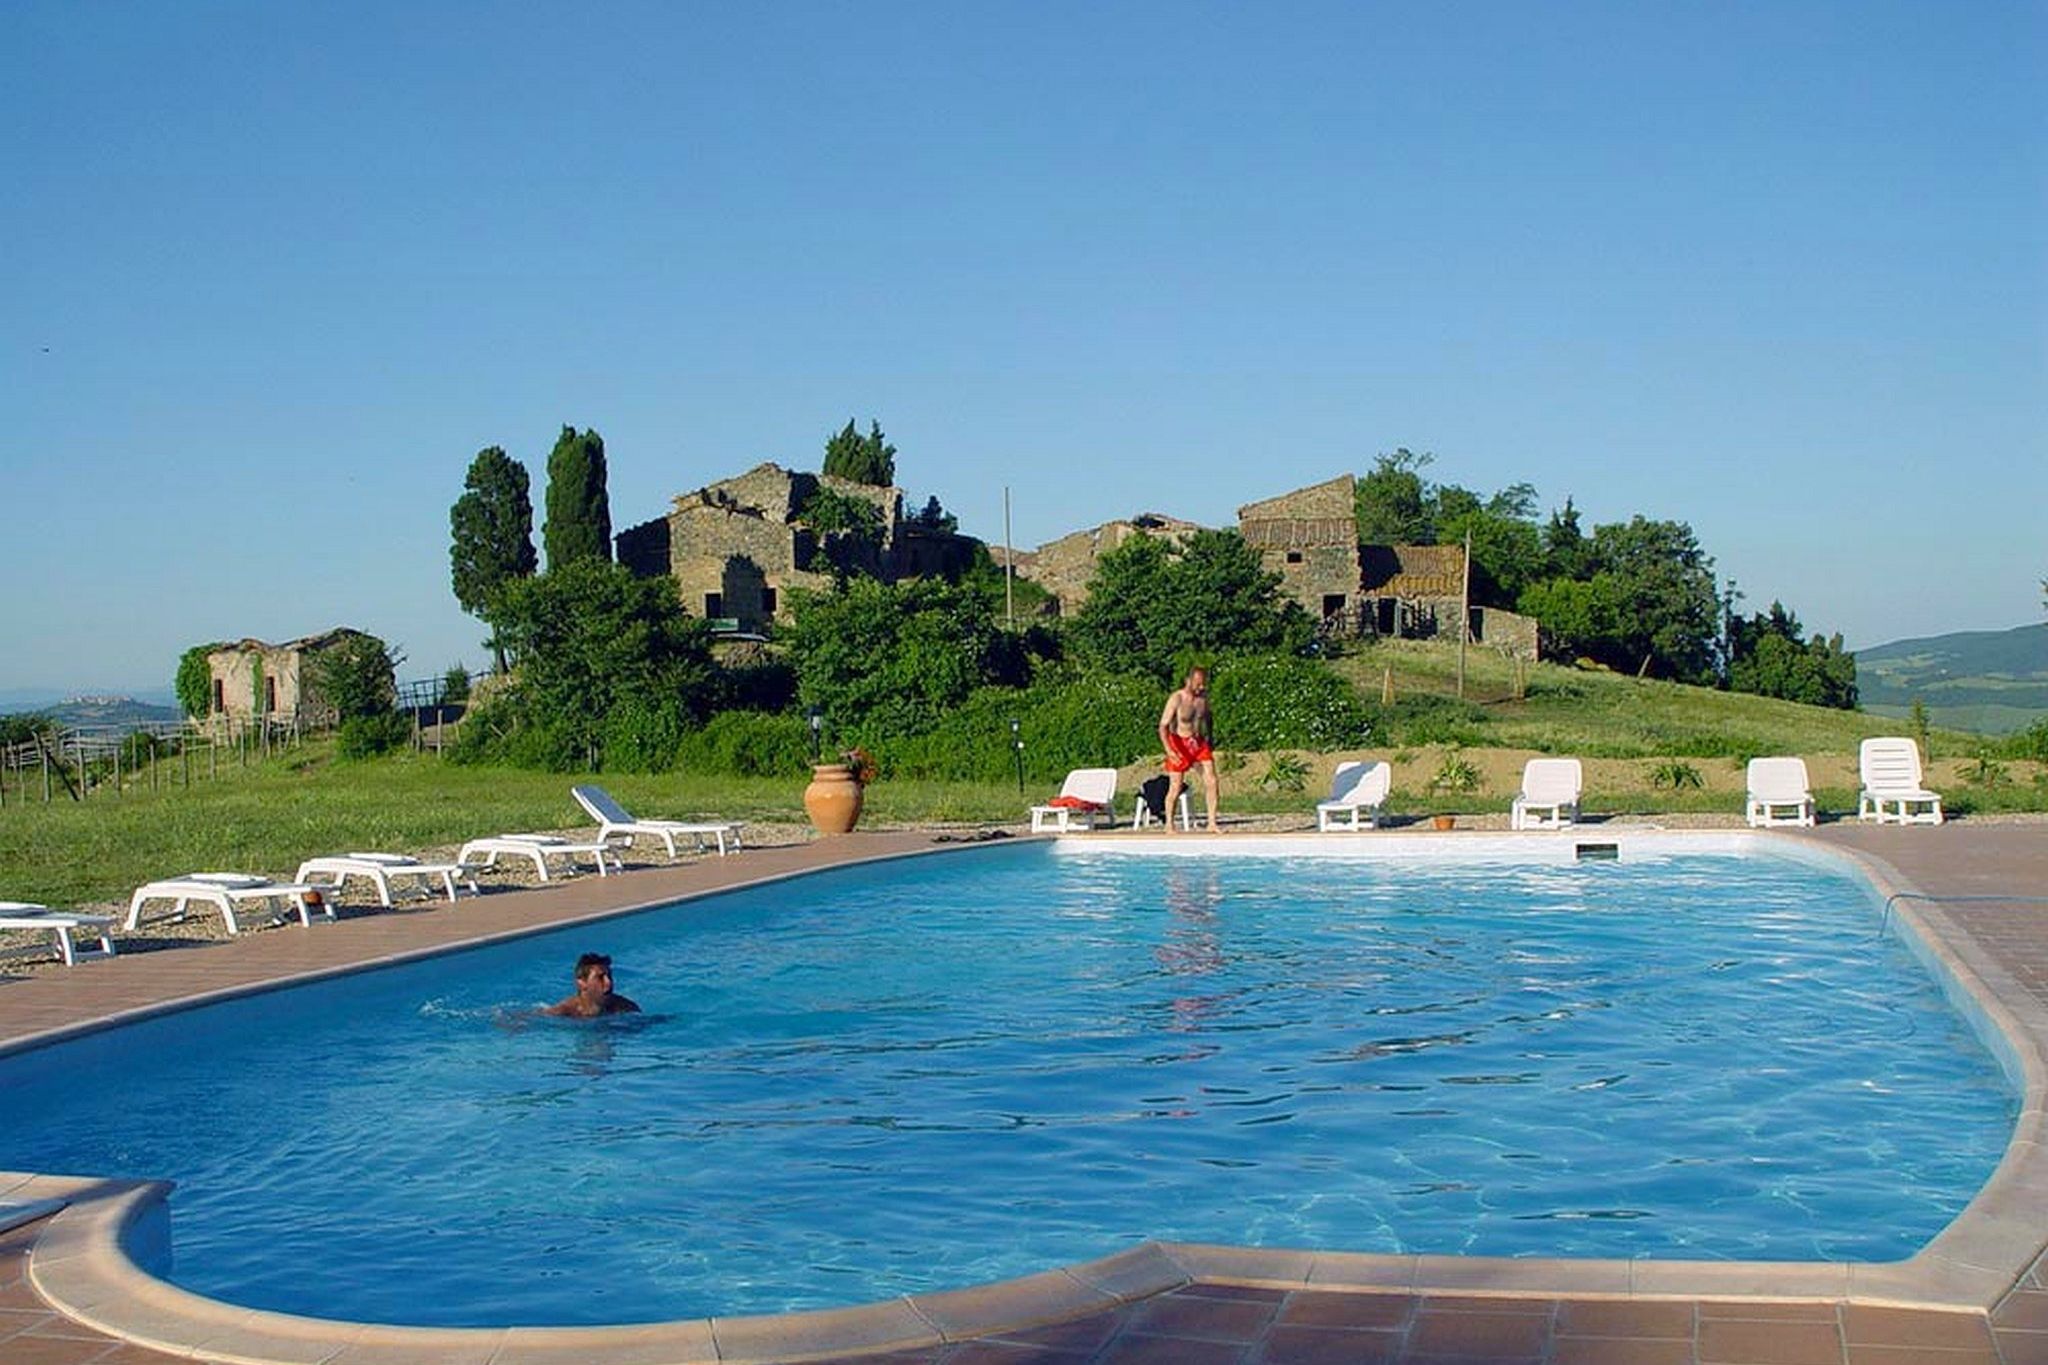 Apartment in a wonderful Agriturismo in a medieval village on the Tuscan hills